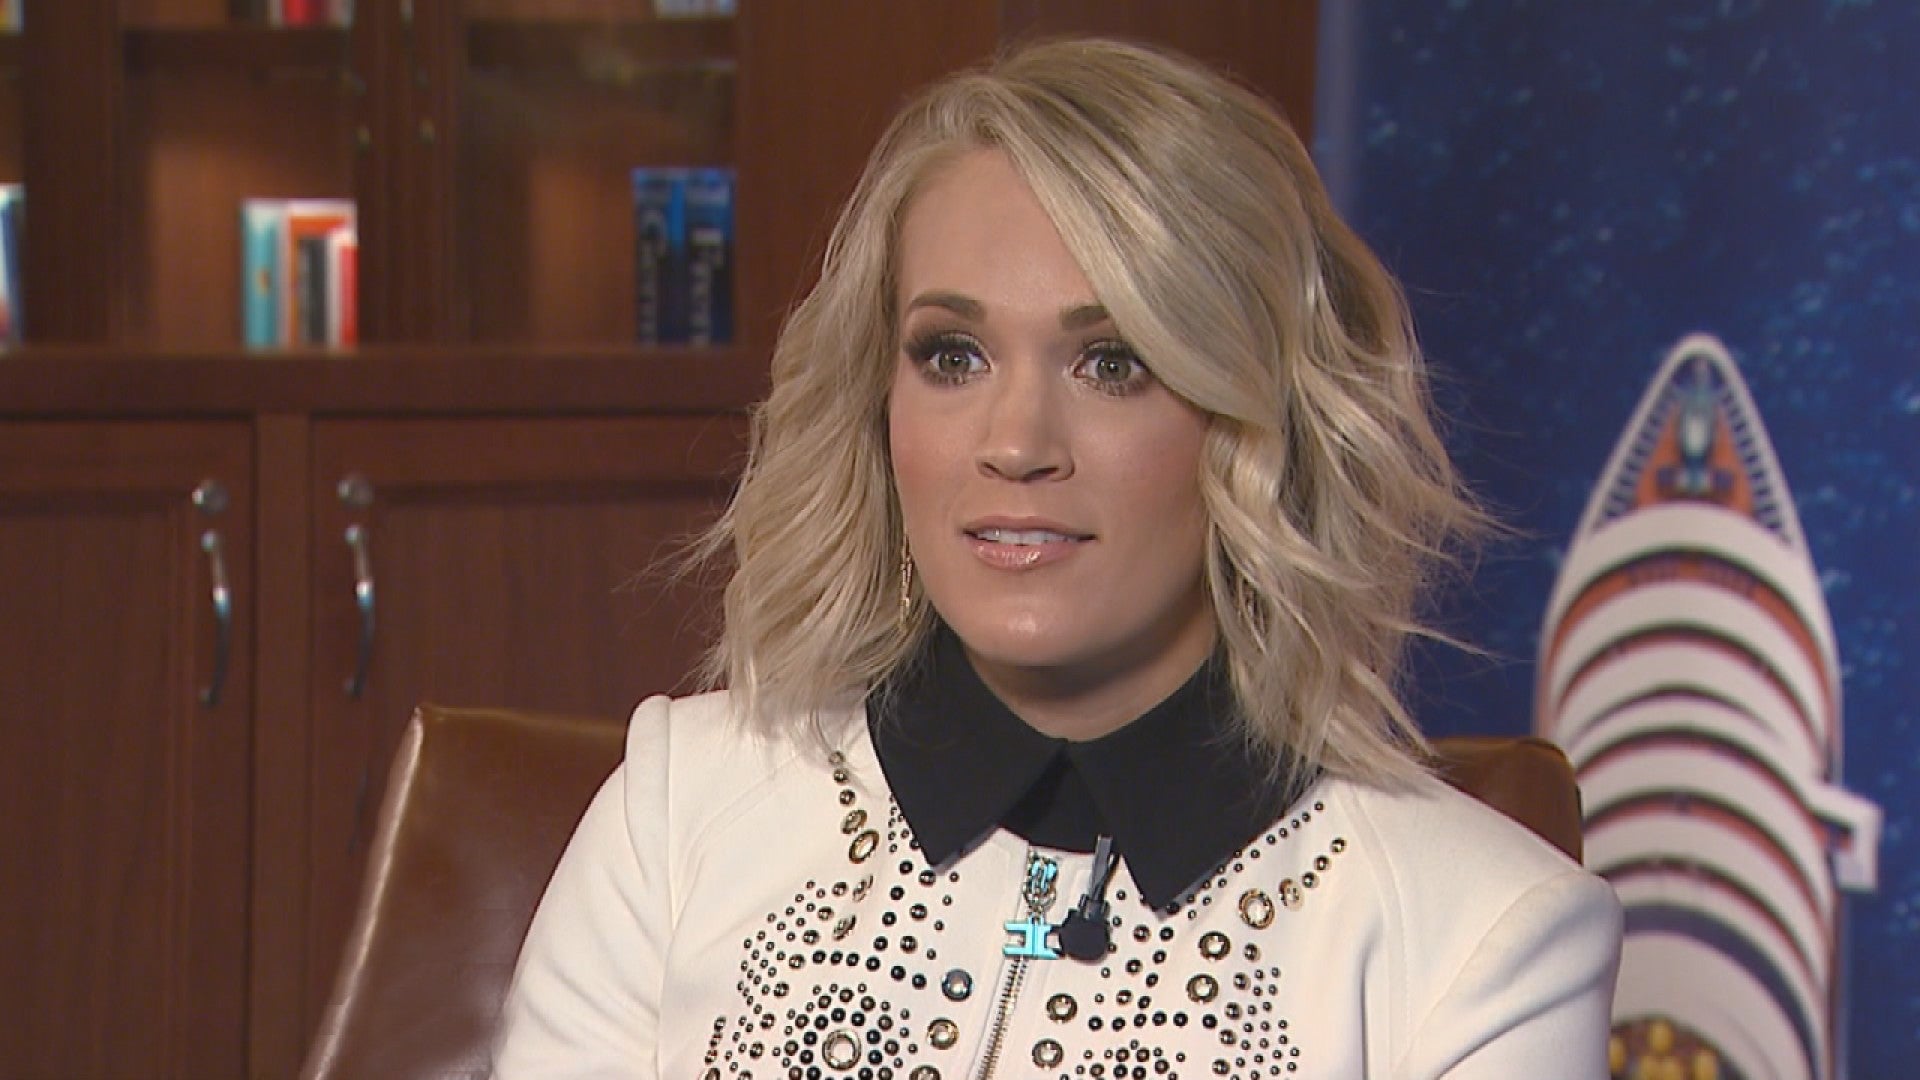 Carrie Underwood celebrates son Isaiah's birthday with tribute